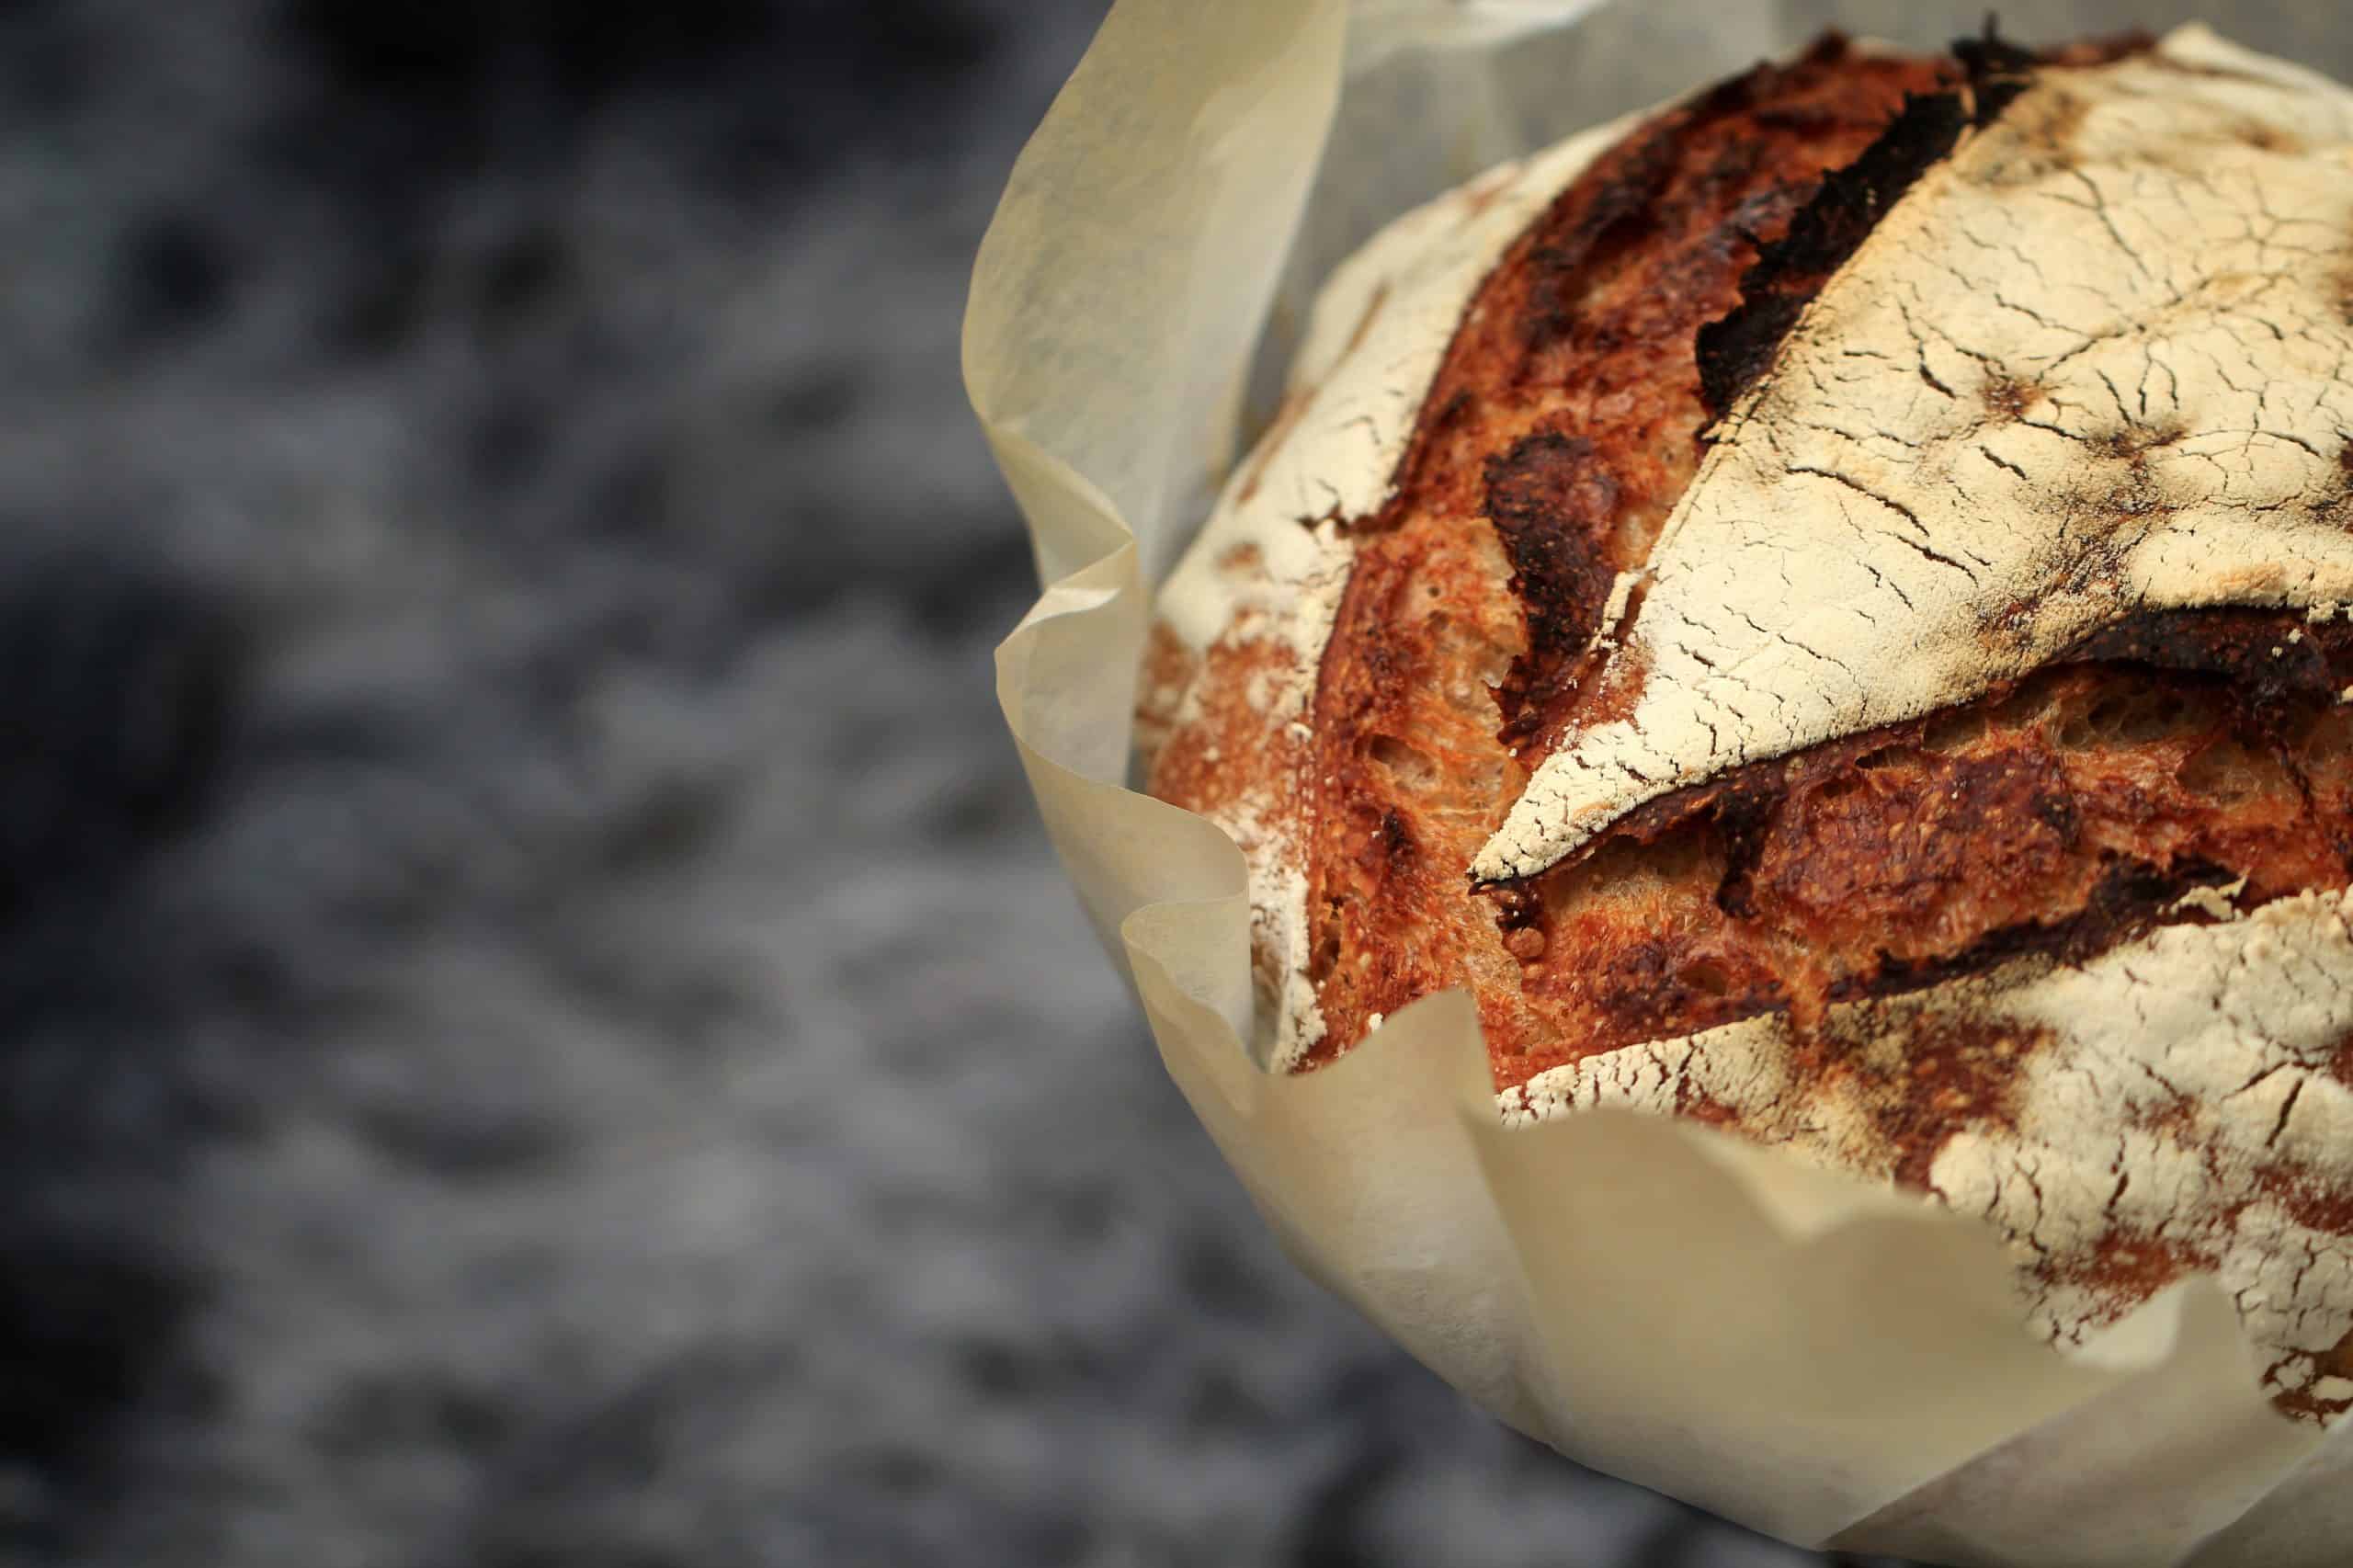 Sourdough has taken the country by a storm. In the last year, it’s become a national obsession.